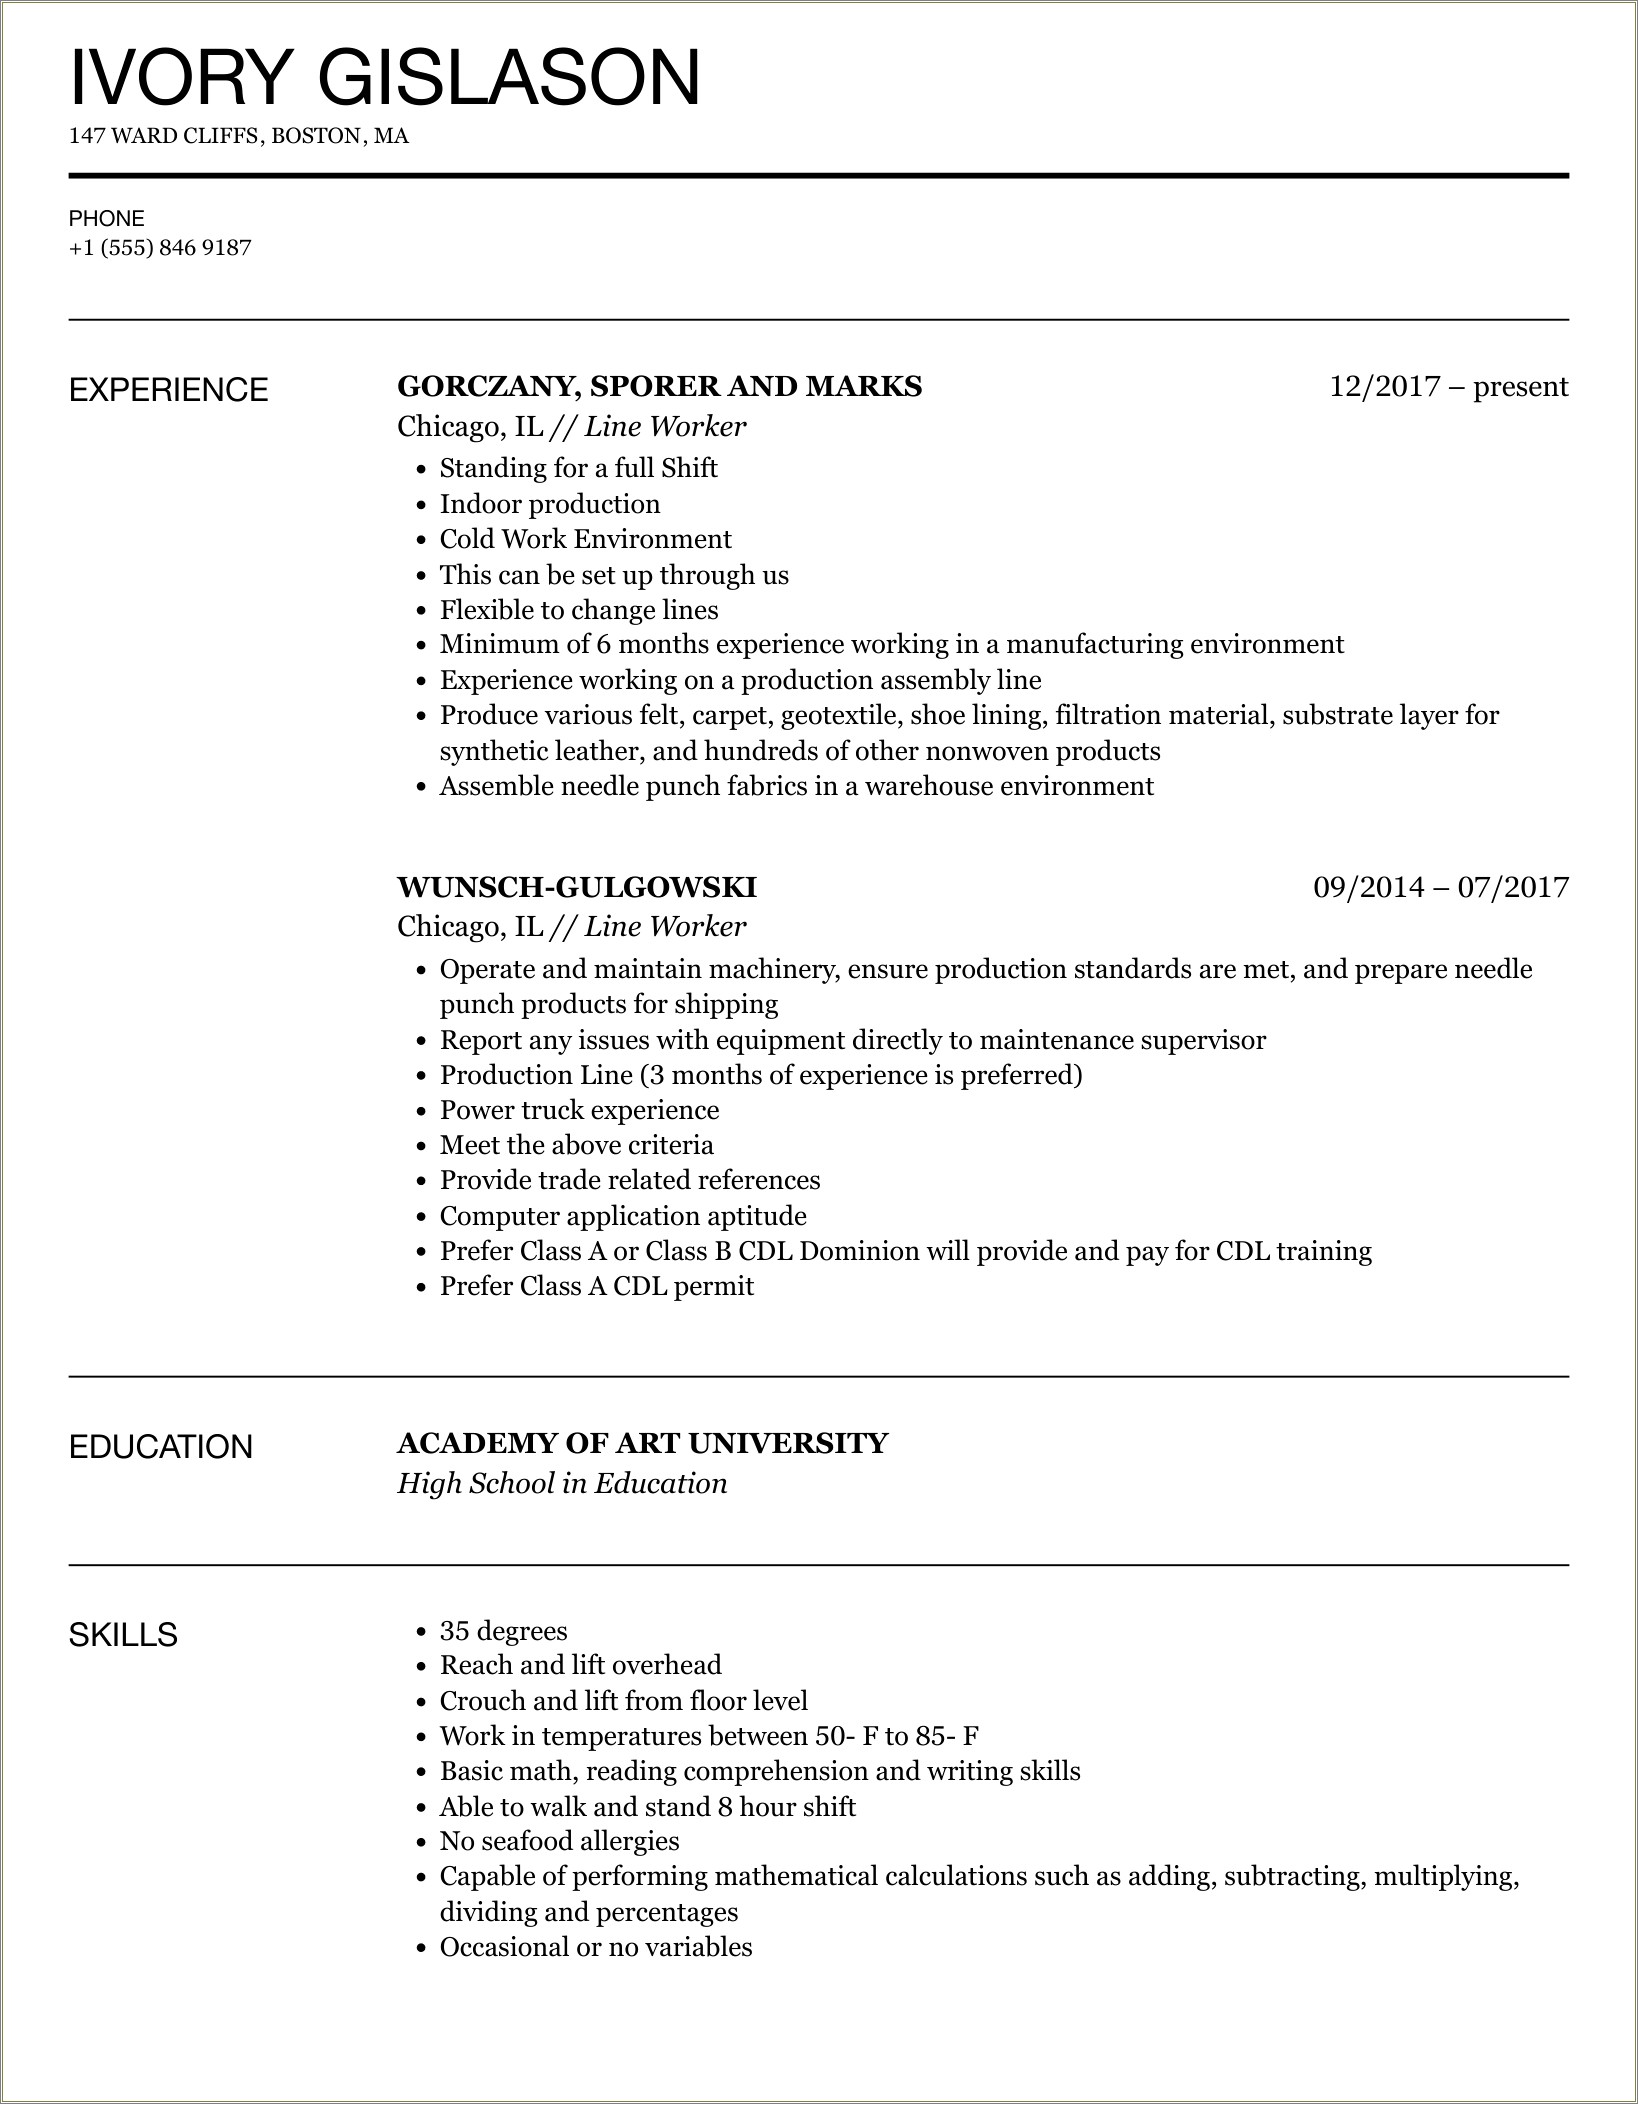 Resume Line For Working Long Hours